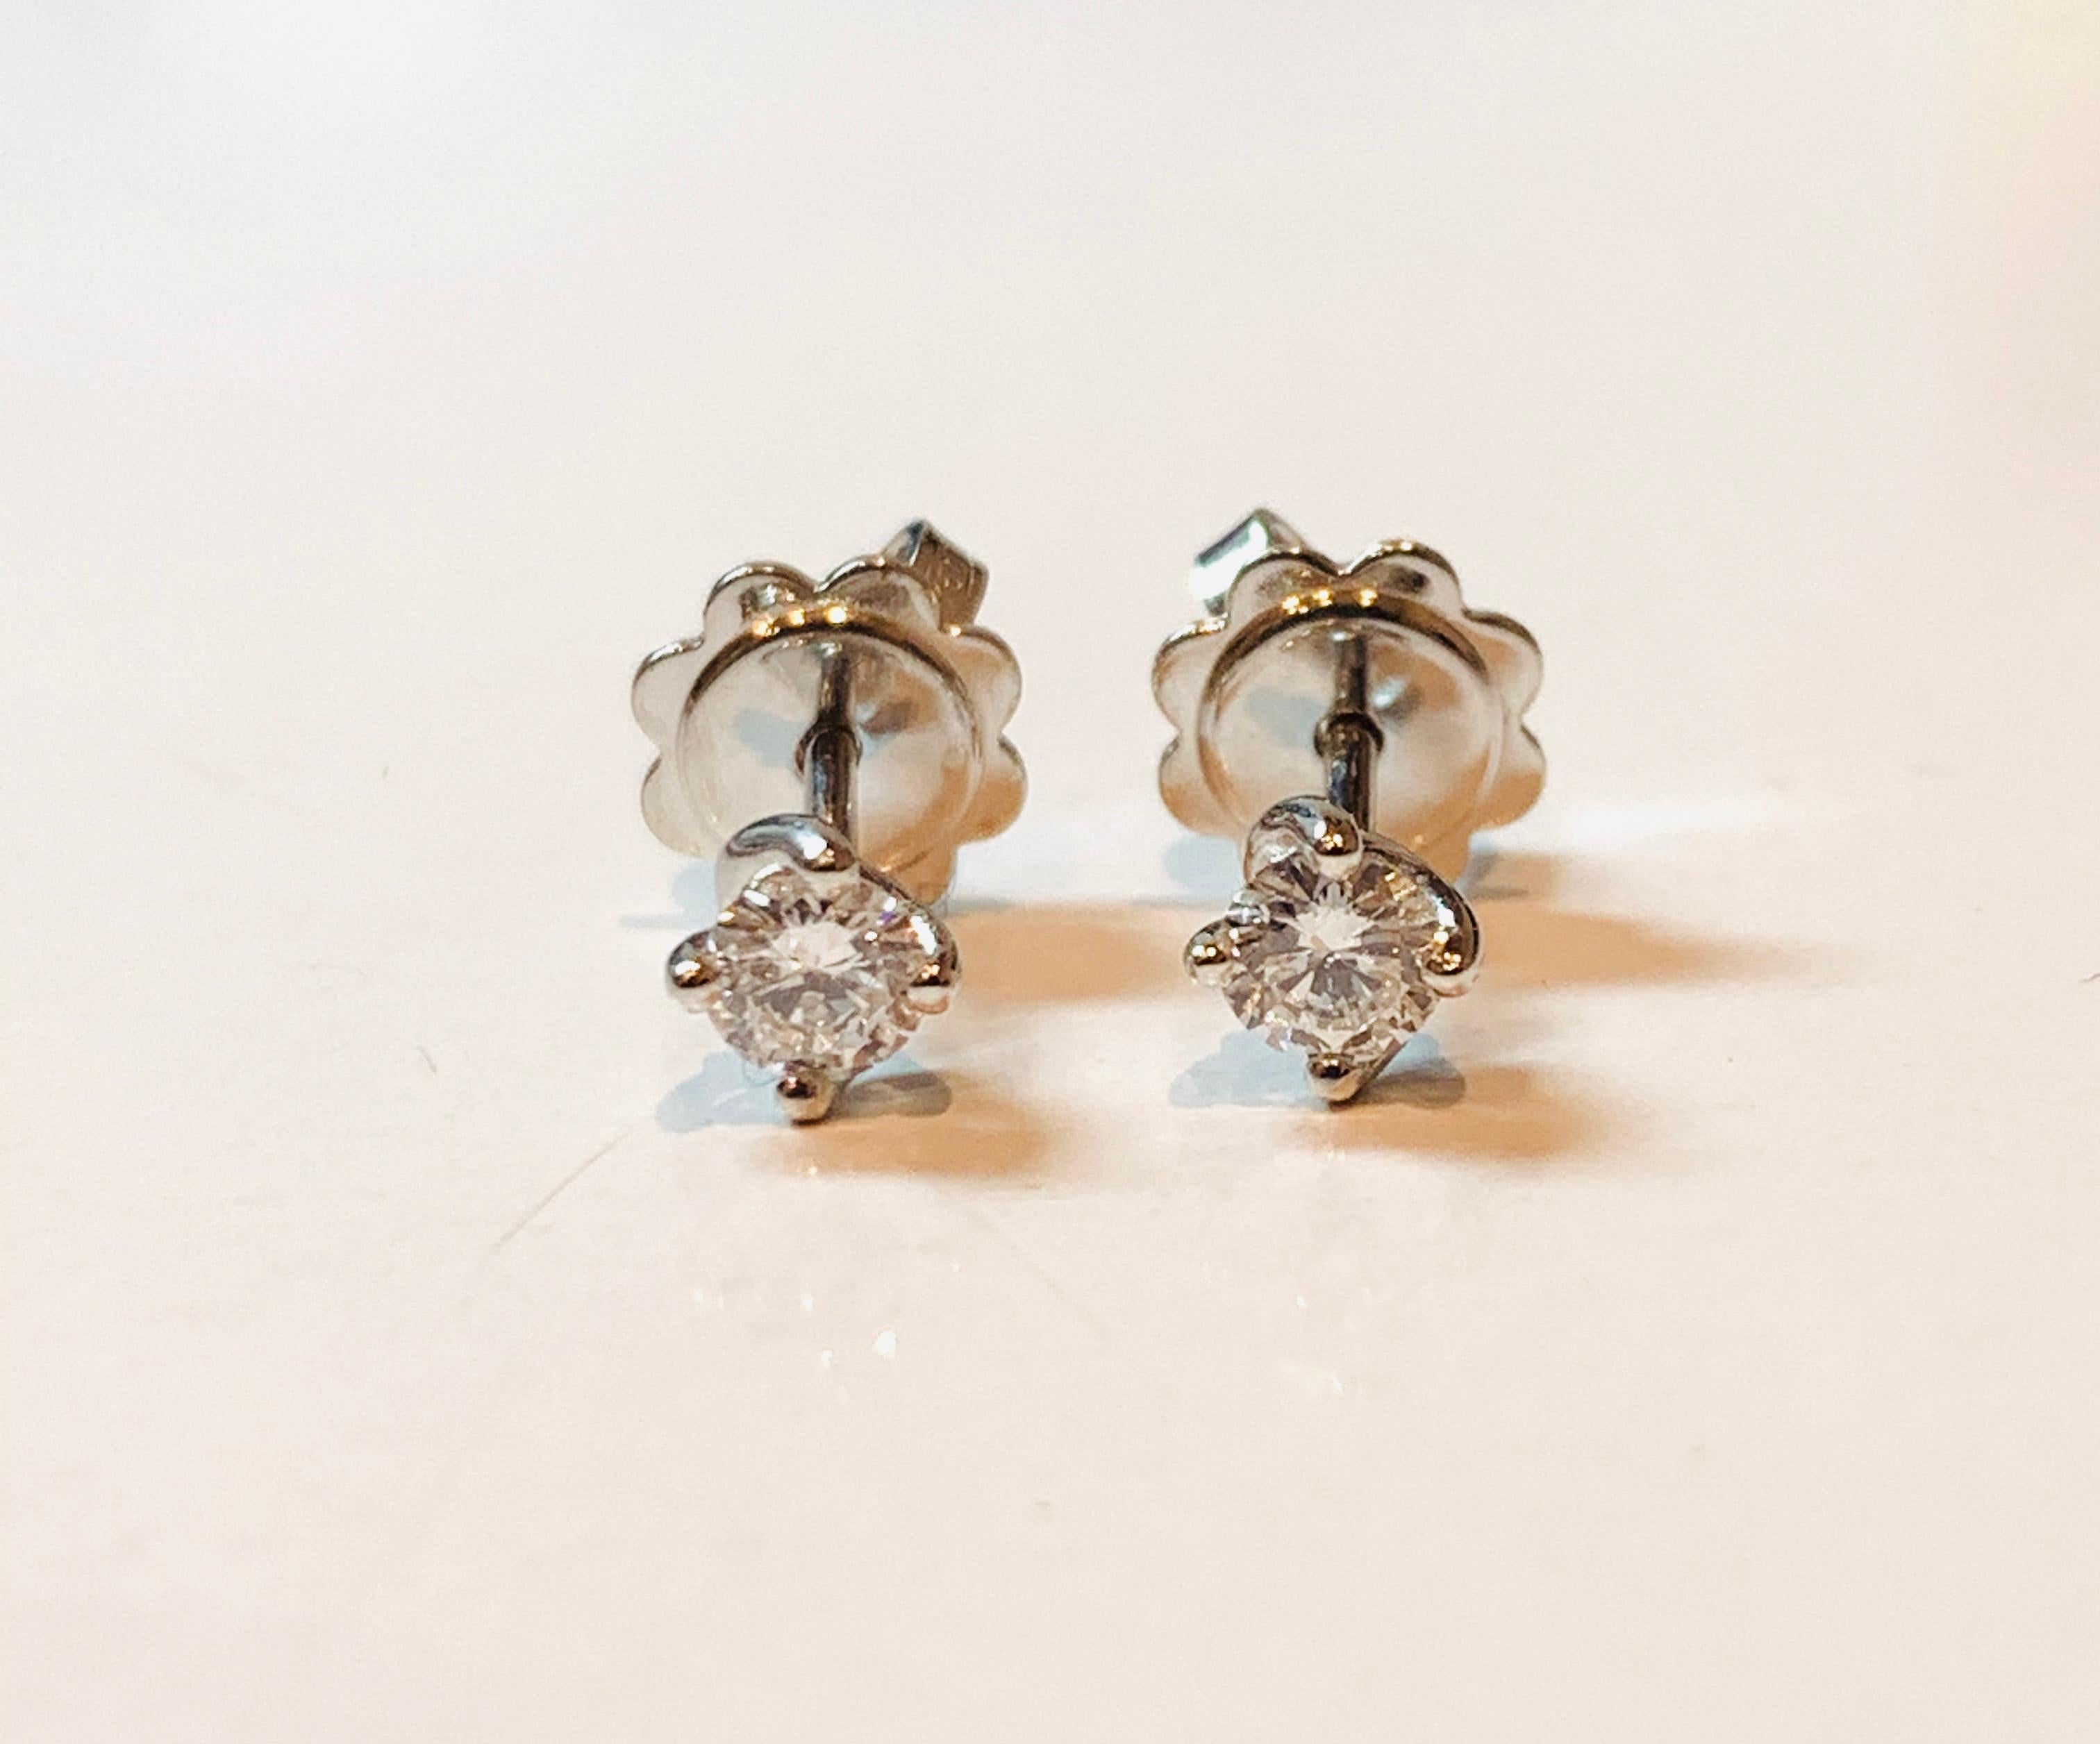 These certified 0.40 carat Diamond stud earrings are from the HRD Antwerp flower collection. 

Designed with 4 twisted prongs, the Diamond sits nestled within the 18Kt white Gold setting, and secured on the ear with butterfly backs. 

High quality